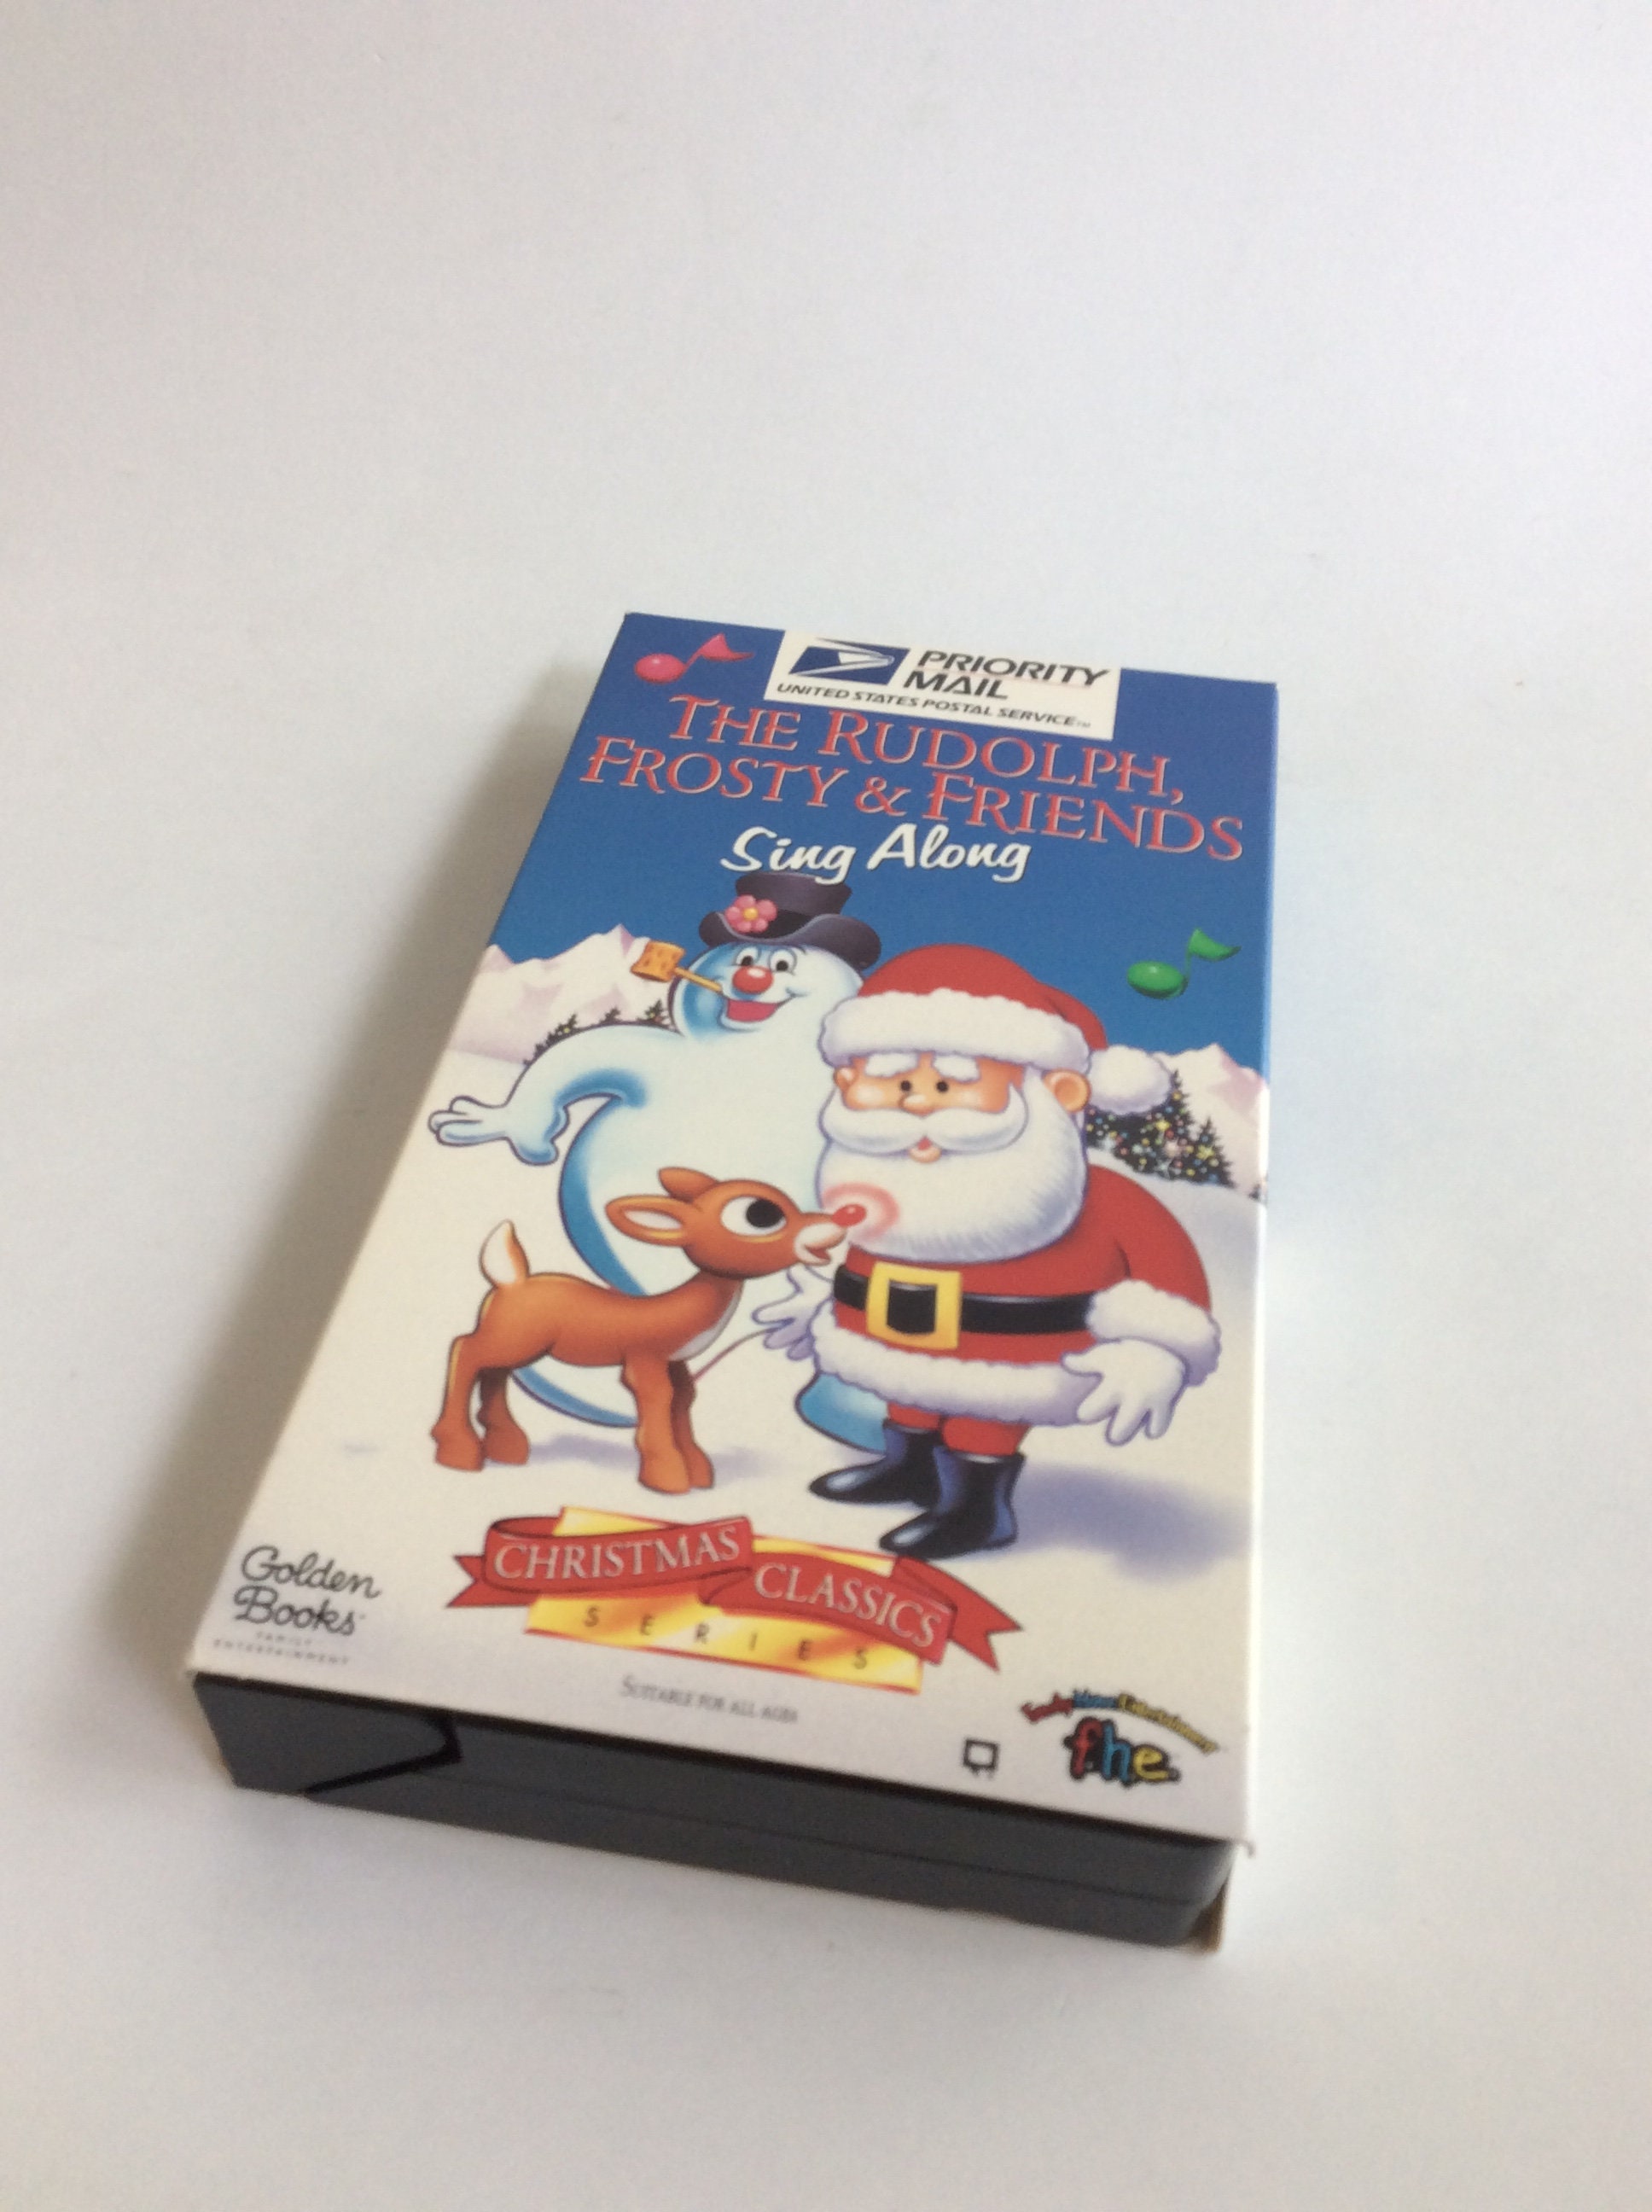 Vintage VHS From Priority Mail the Rudolph Frosty & Friends | Etsy